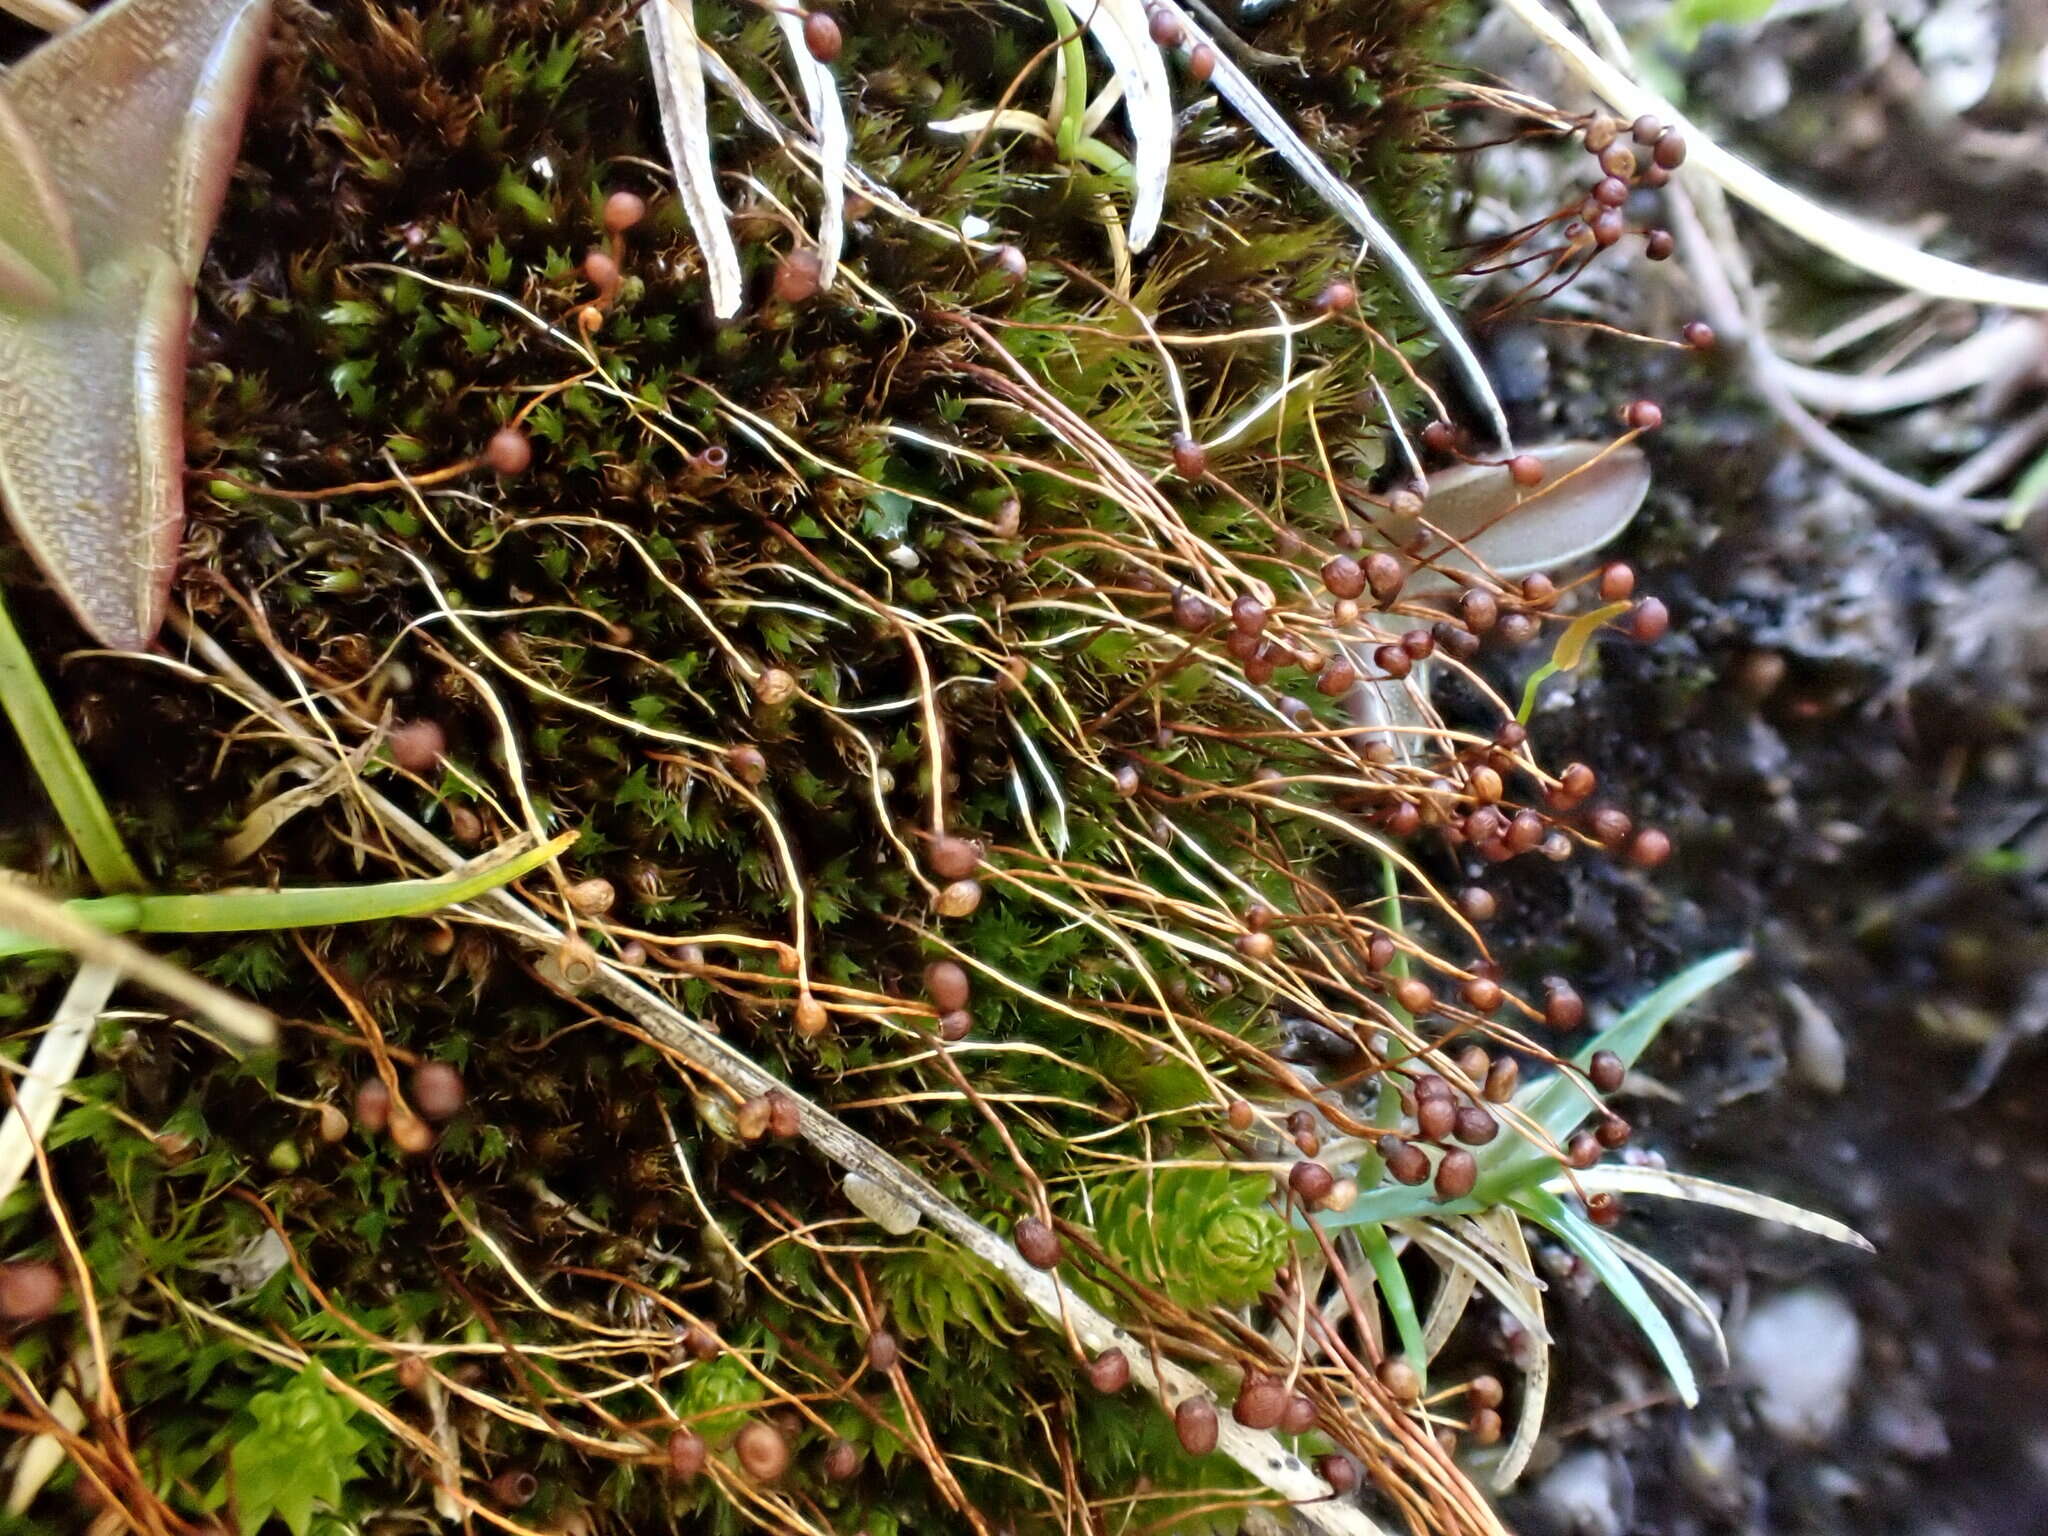 Image of down-looking moss